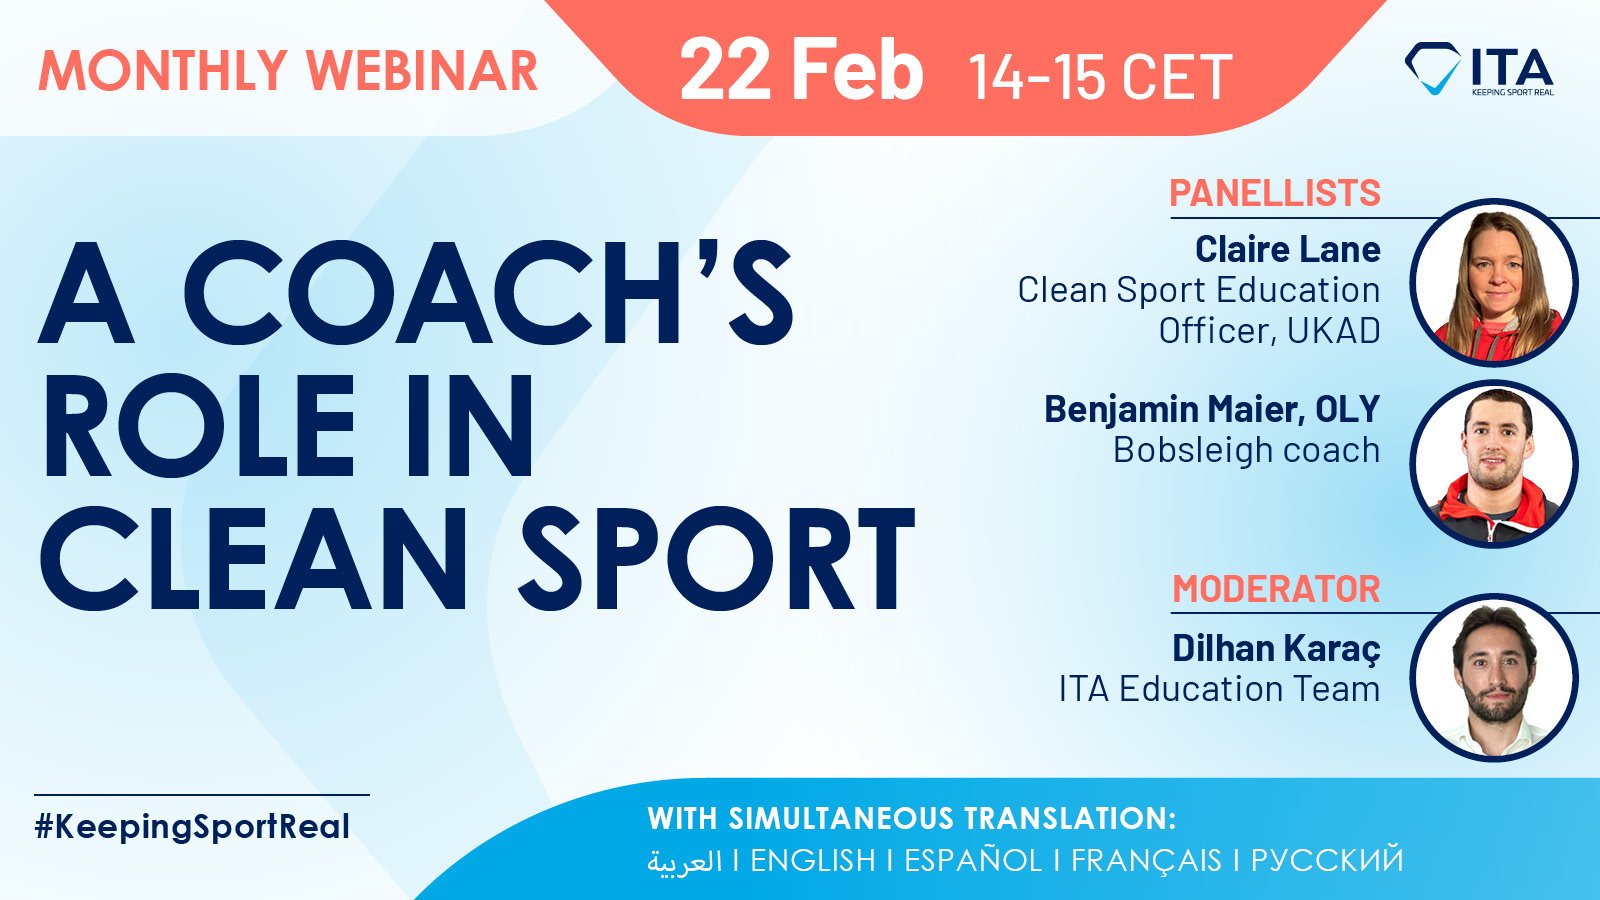 Monthly webinar - A coach's role in clean sport